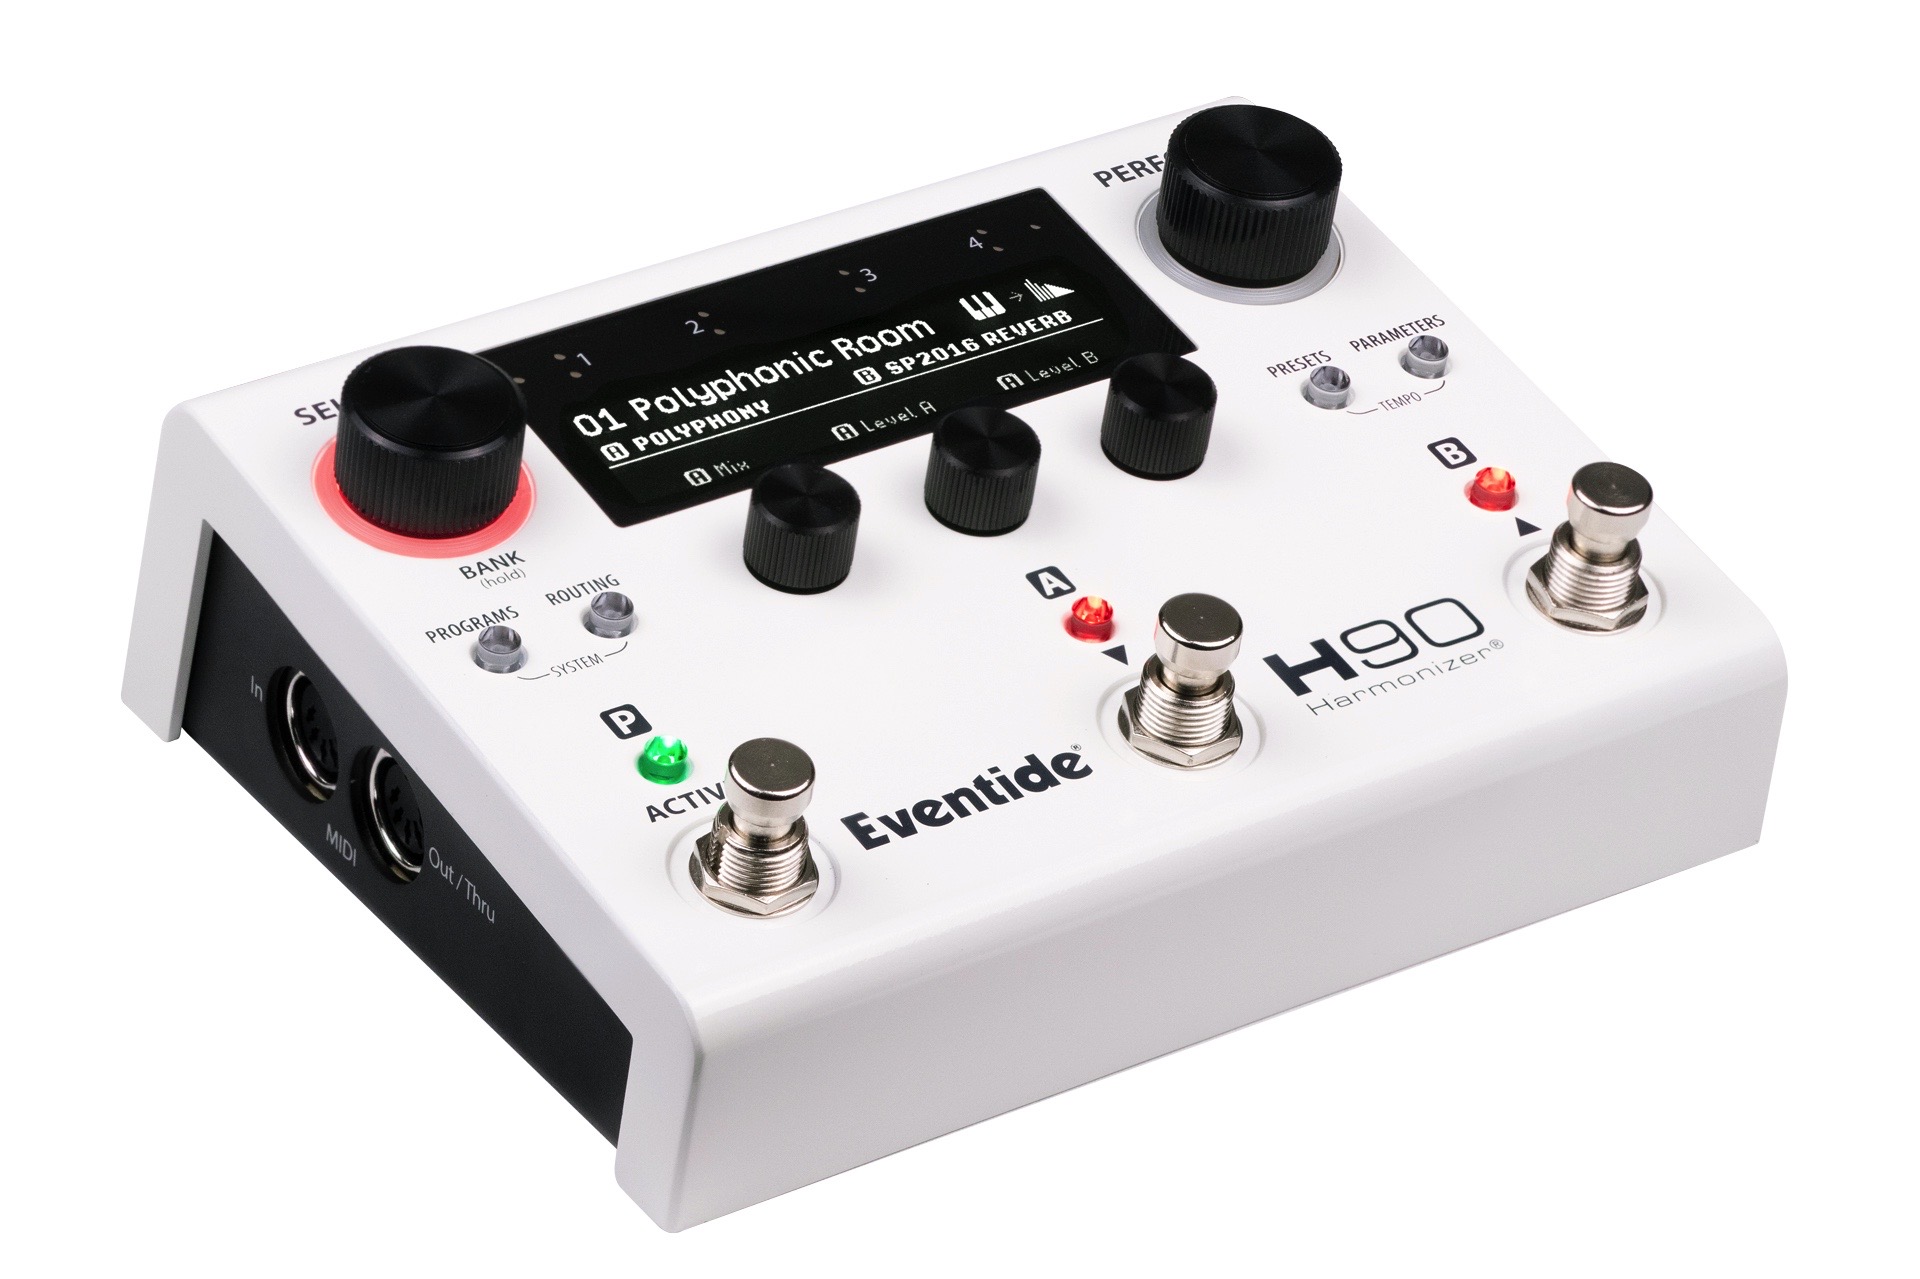 Eventide’s H90 Harmonizer is an insanely powerful and insanely expensive guitar pedal